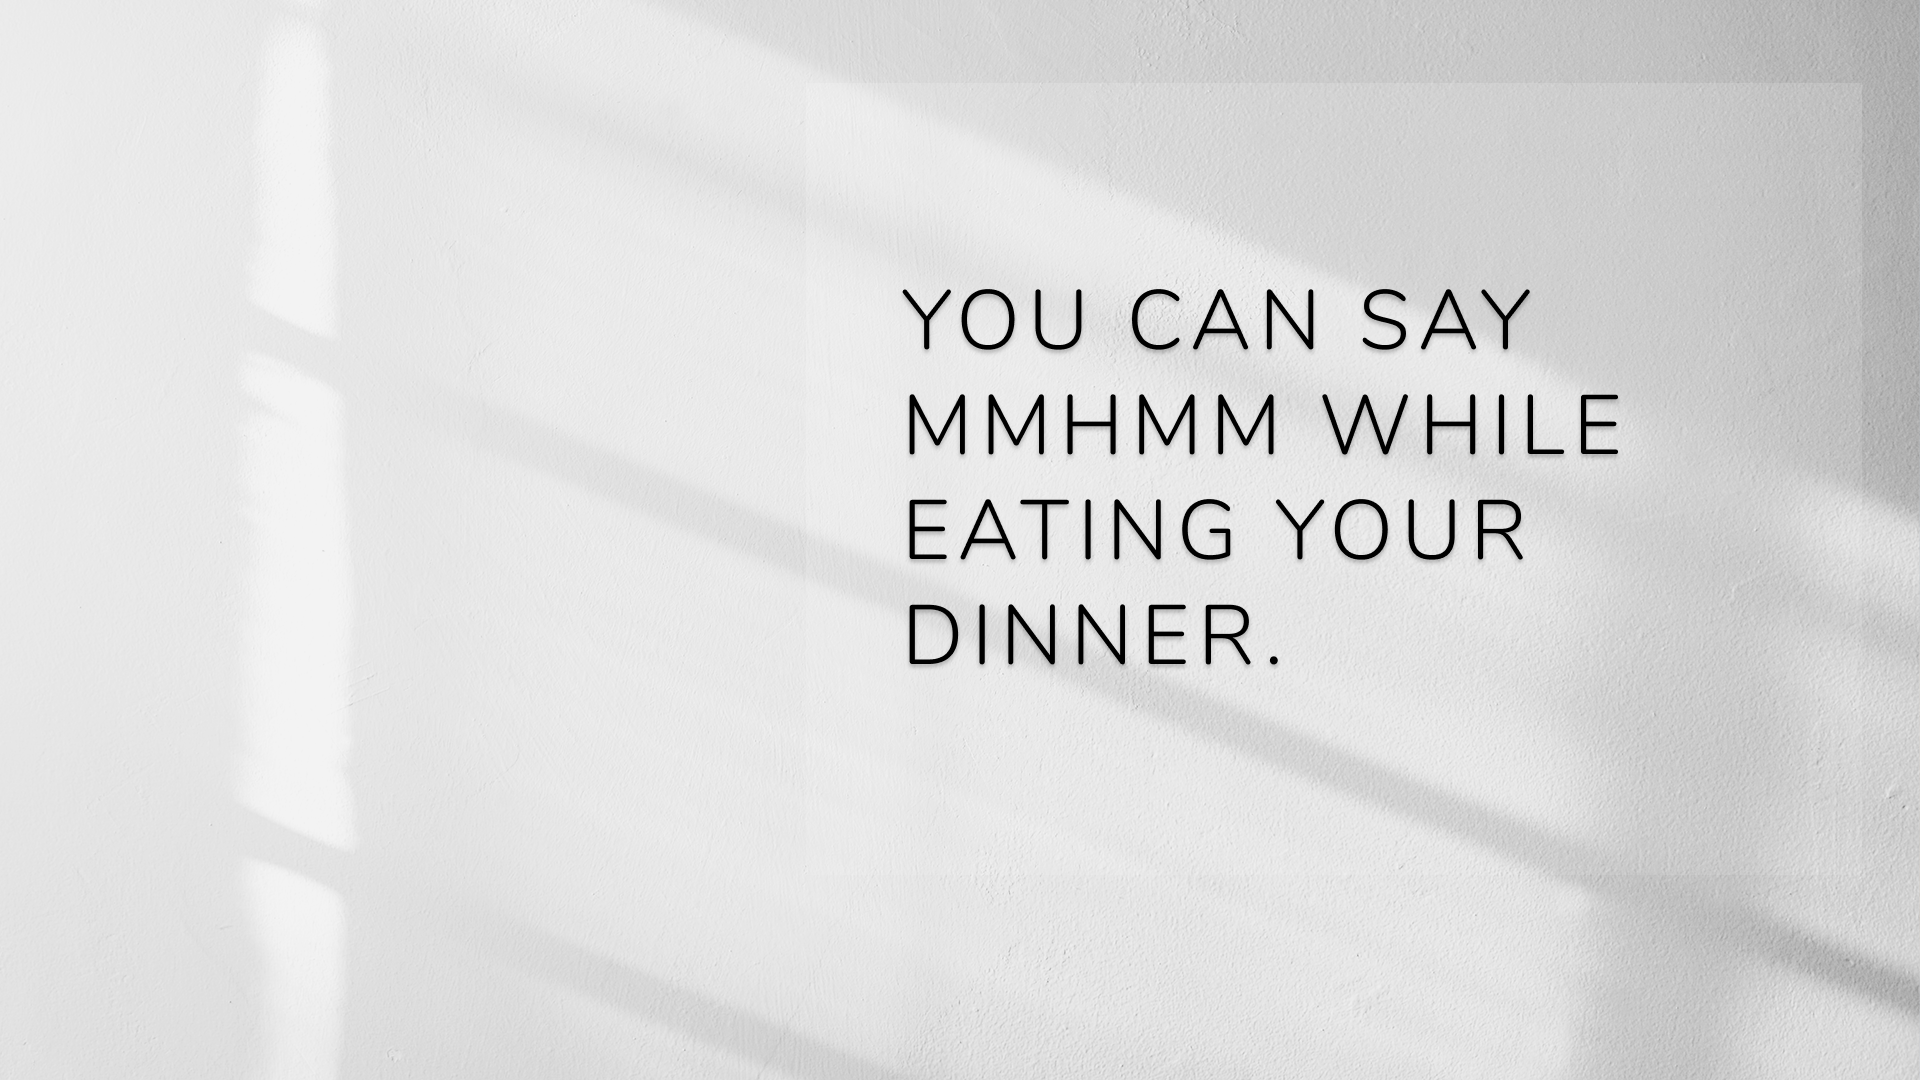 「You can say mmhmm while eating your dinner.」と書かれたスライドと太陽光が当たる白い壁